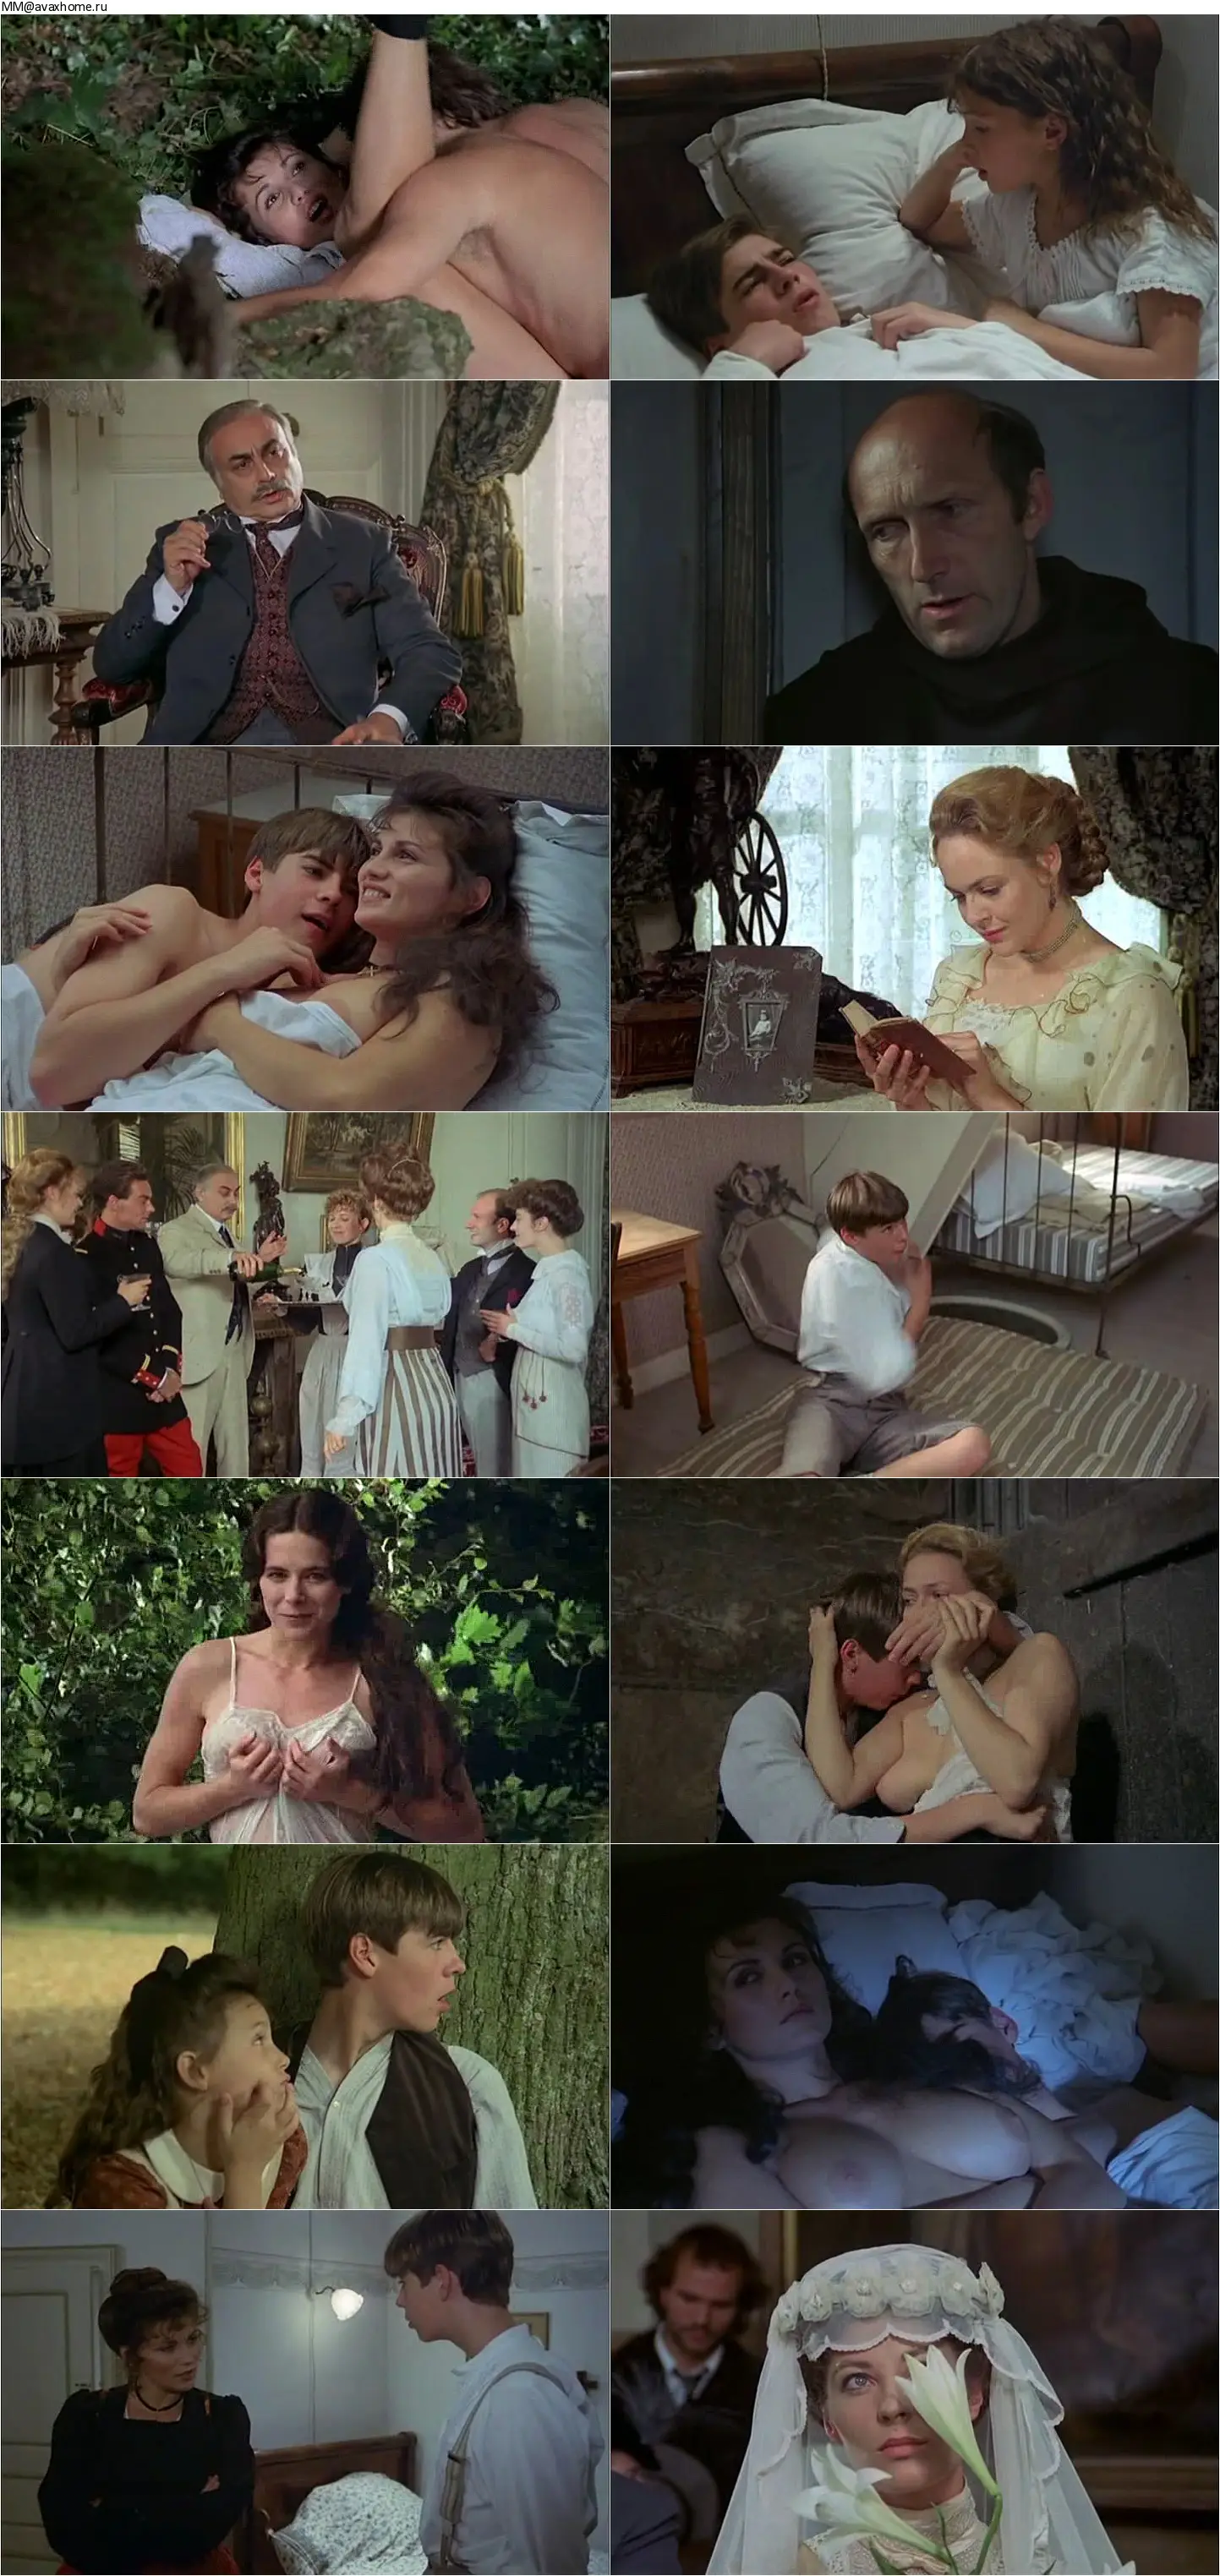 Exploits of a young don juan nude scenes